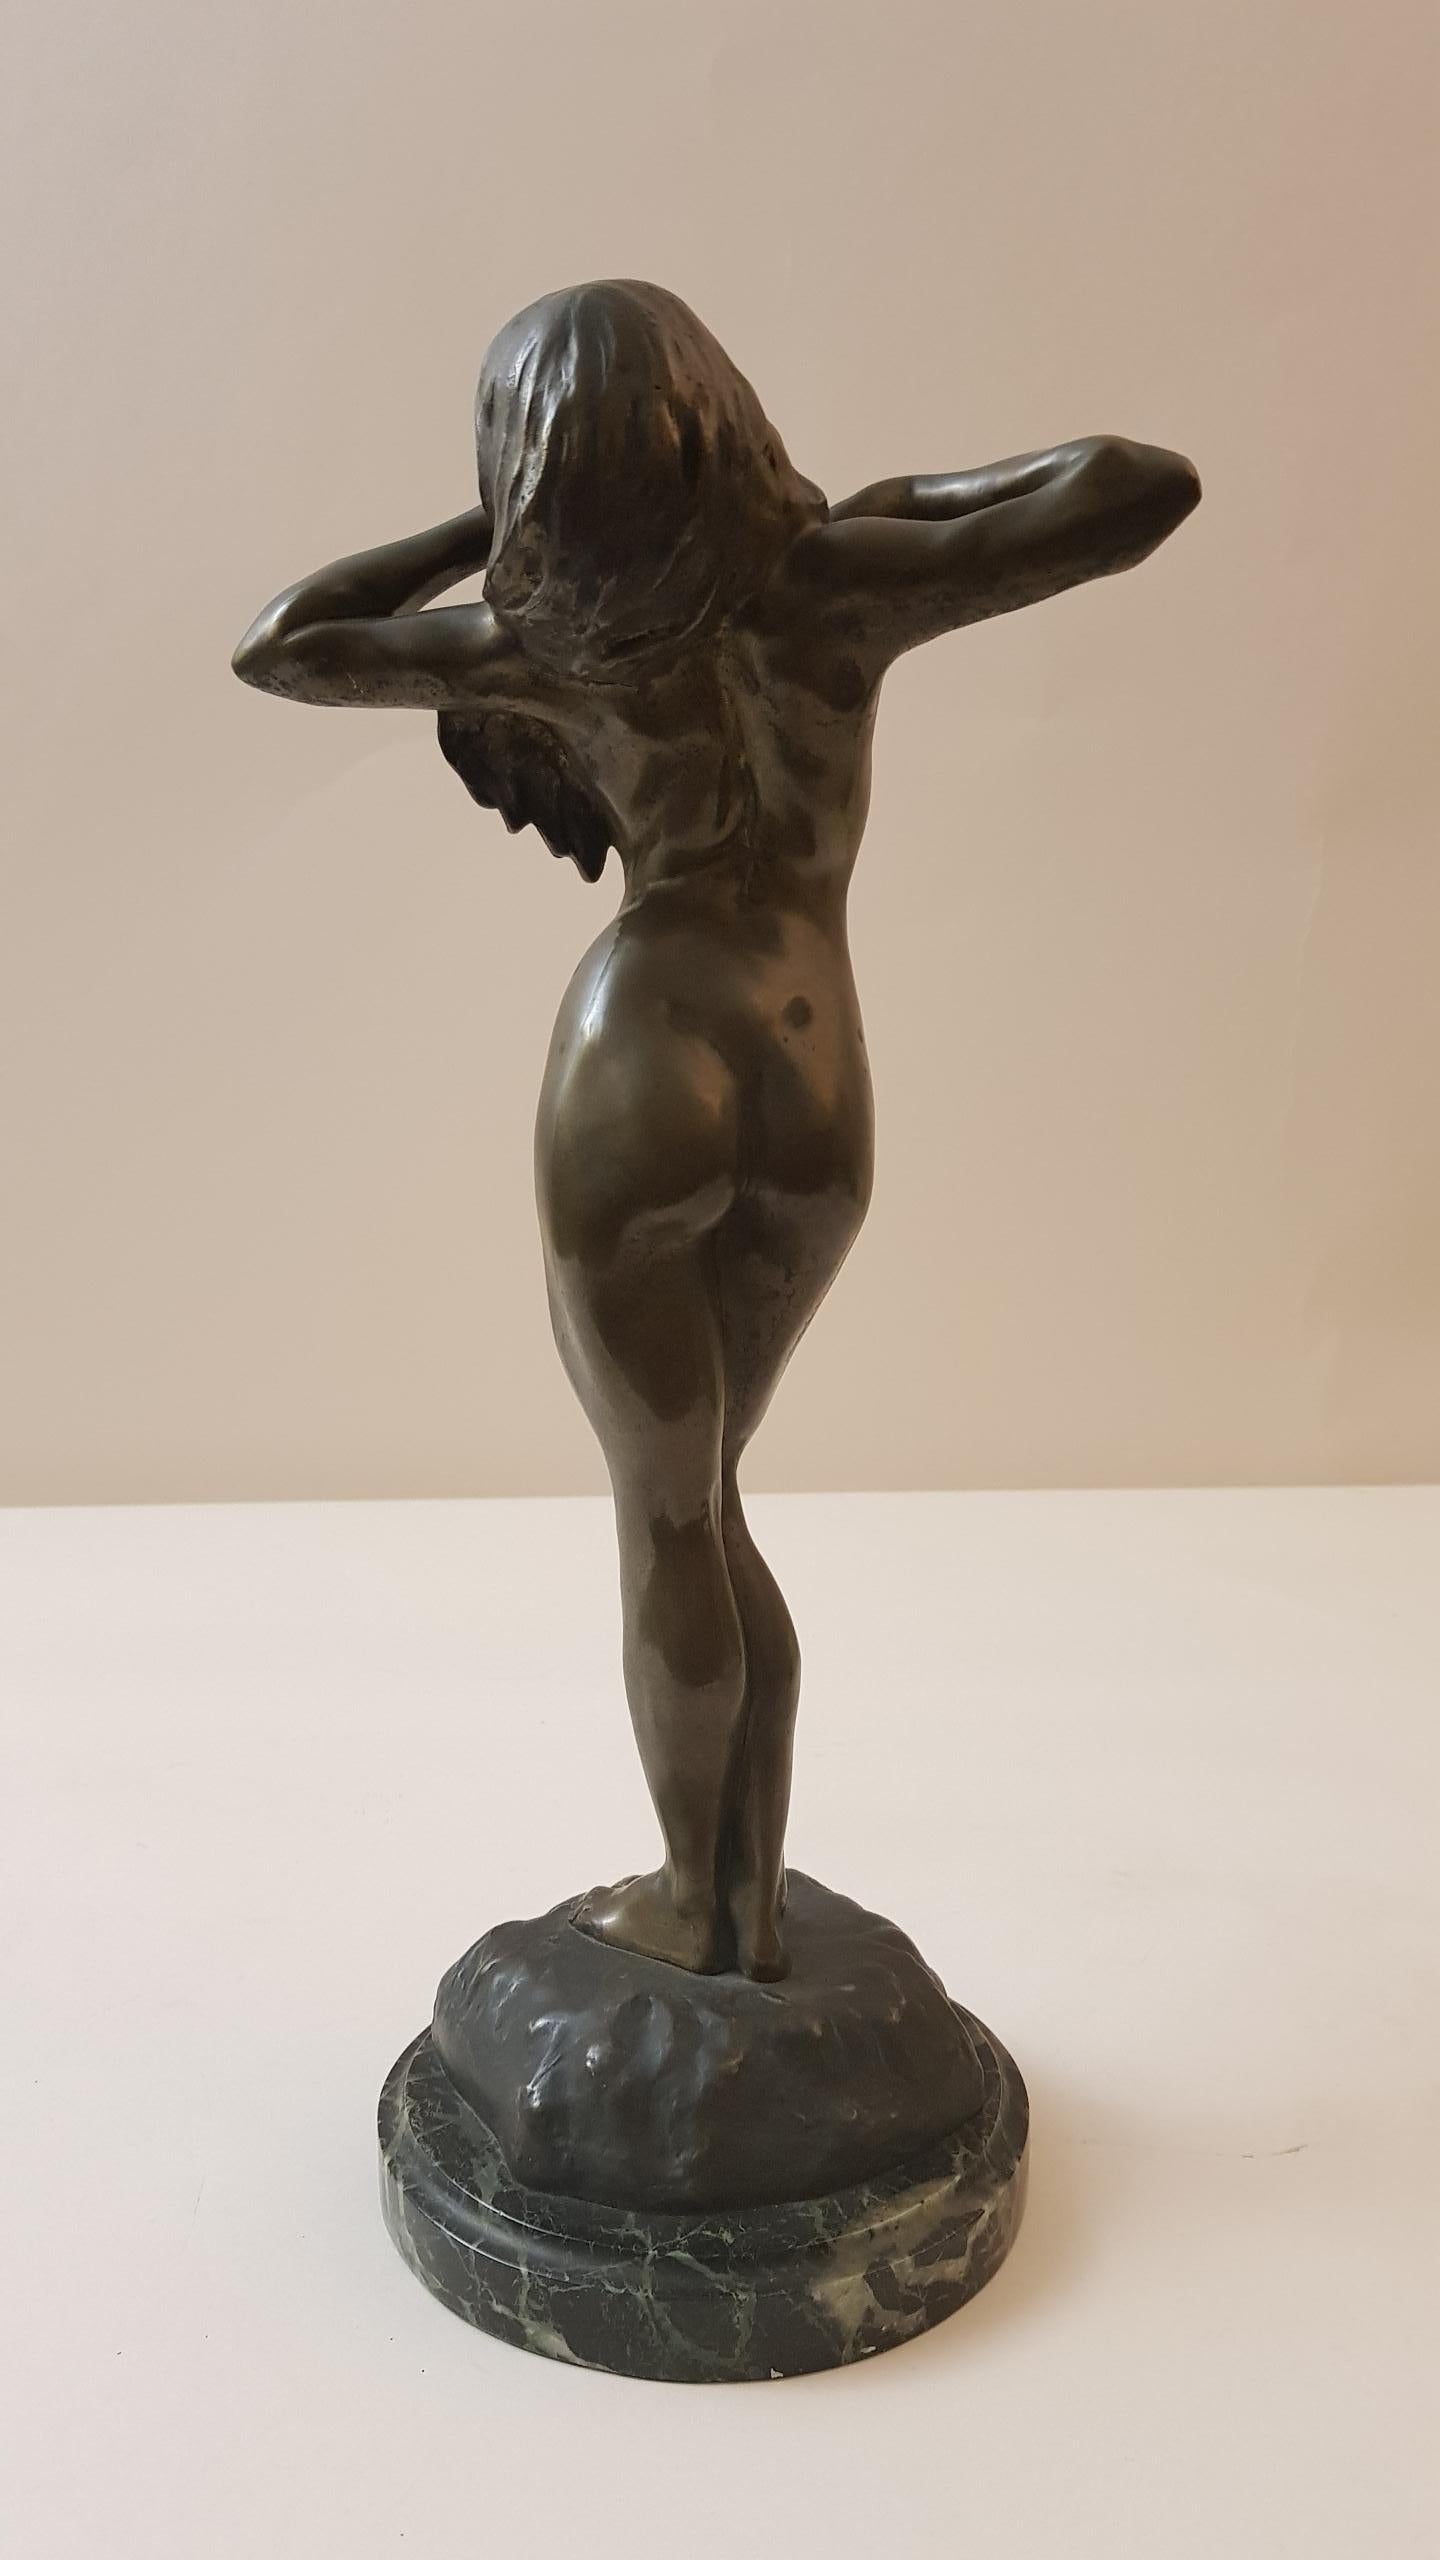 Very nice bronze woman's sculpture
signed.